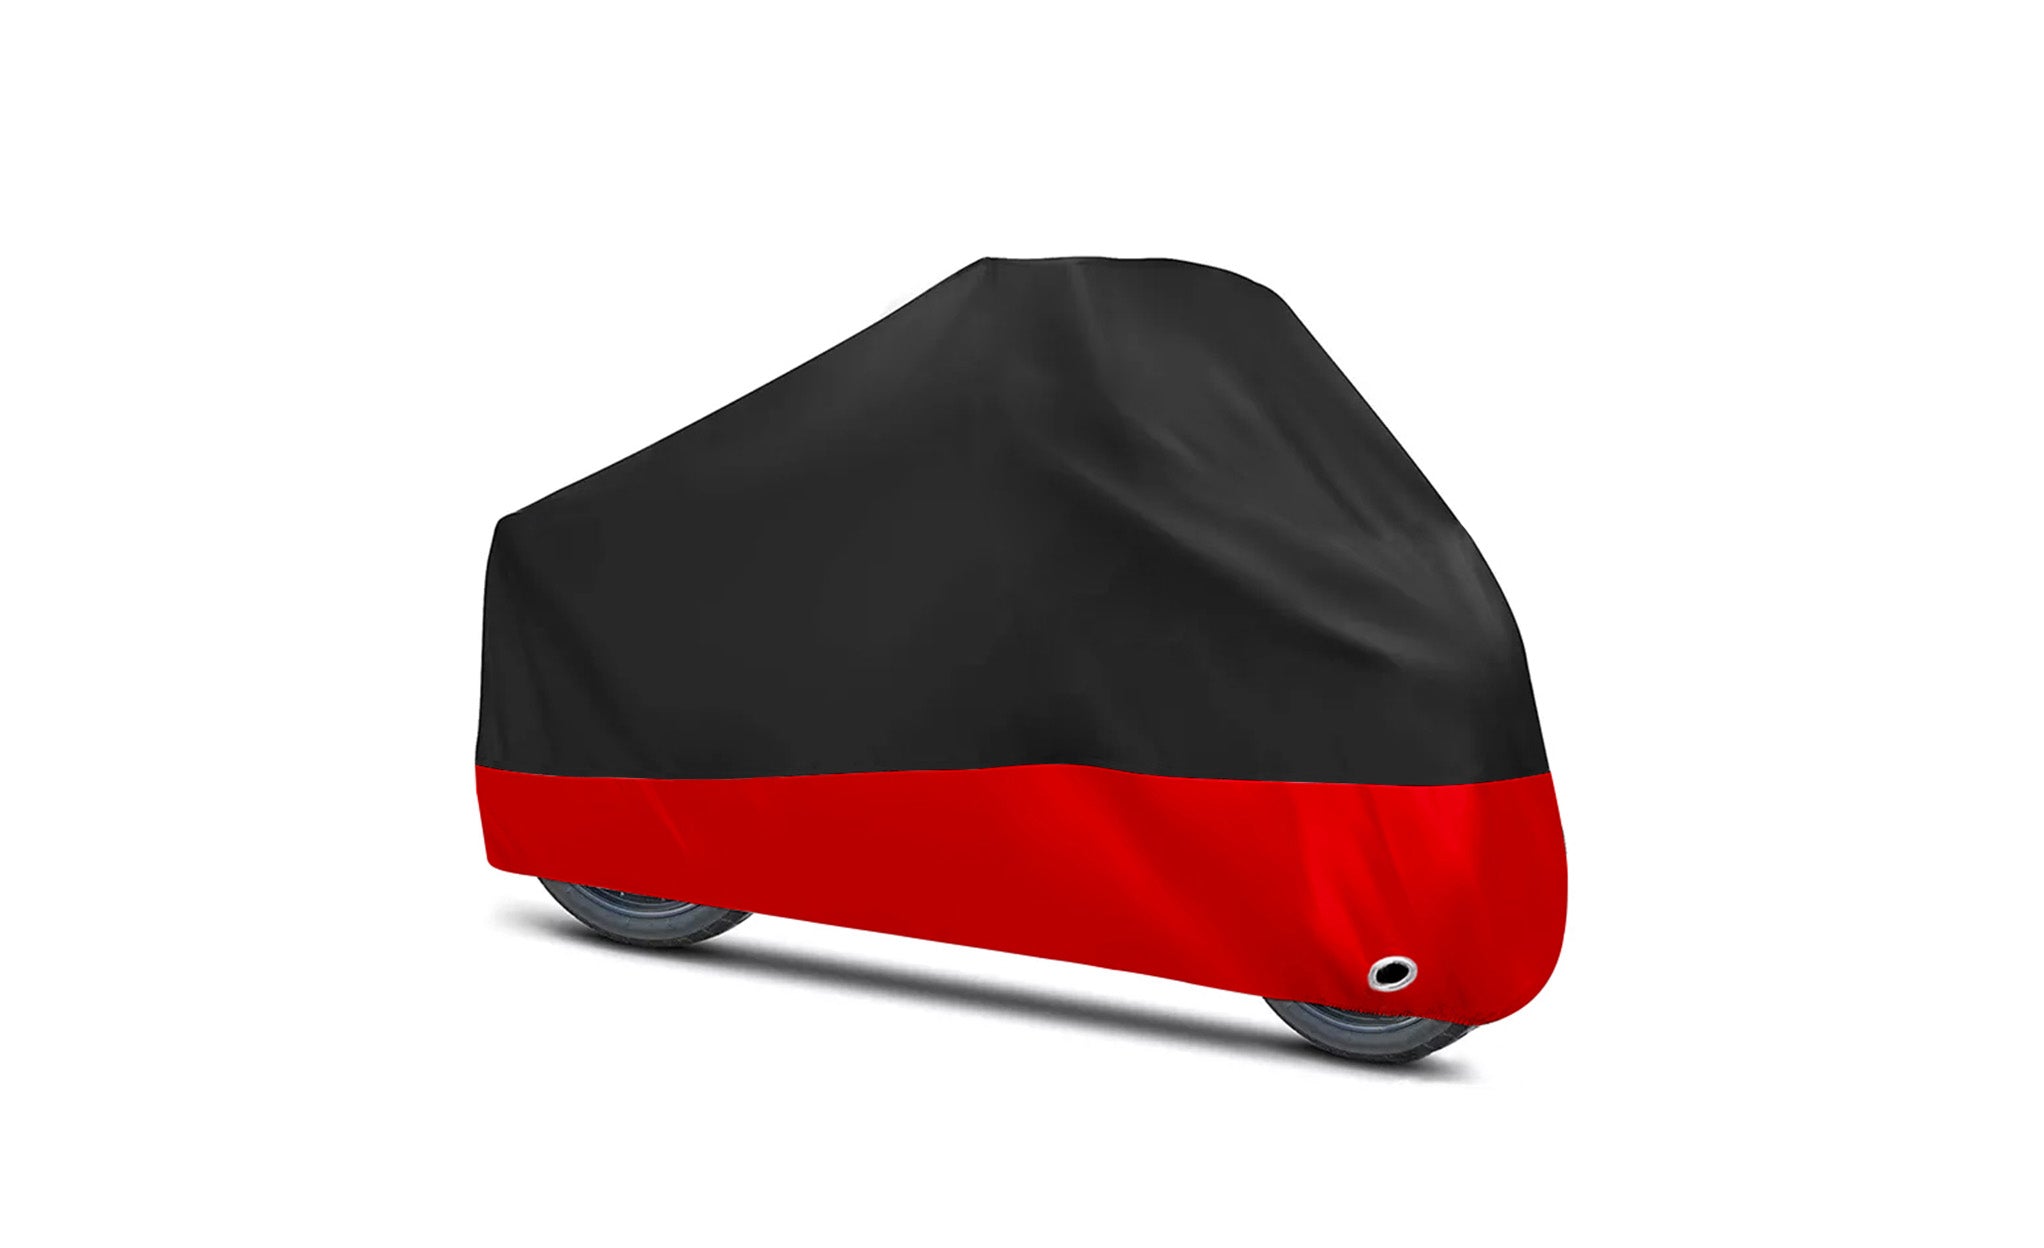 Weather Resistant/Waterproof Motorcycle Cover Bag on Bike View @expand